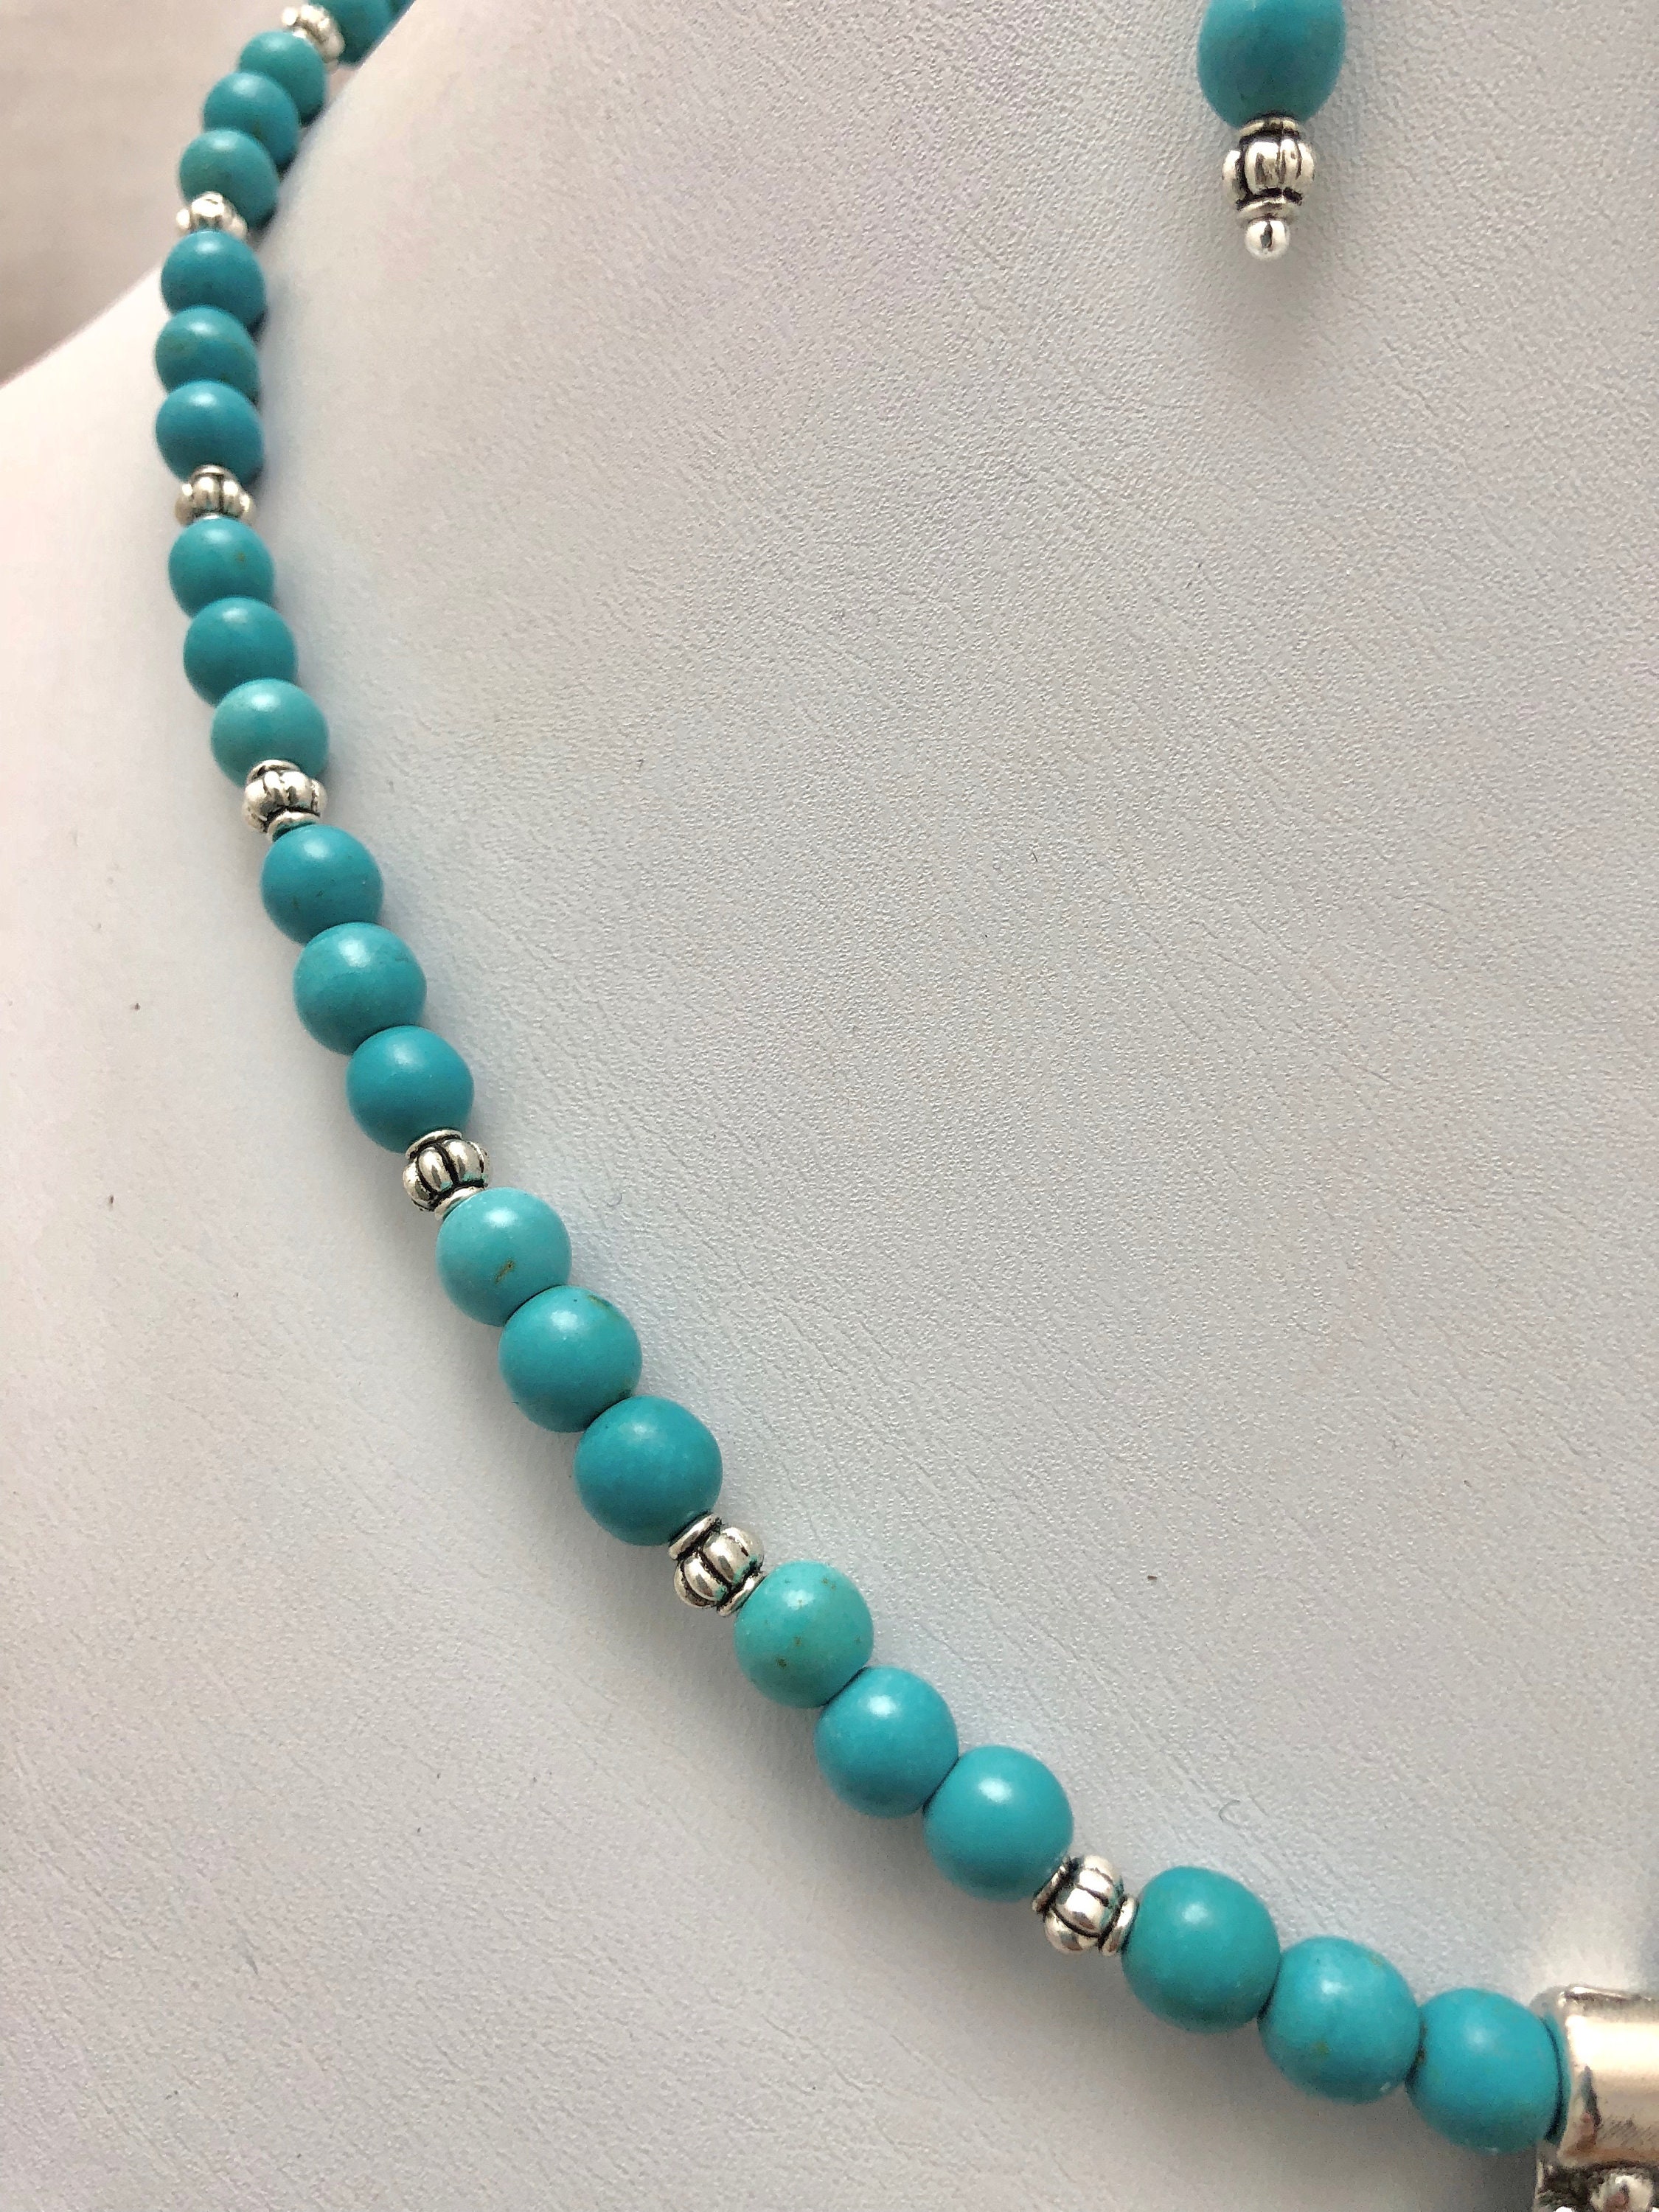 Simple turquoise magnesite necklace with silver pendant | Etsy